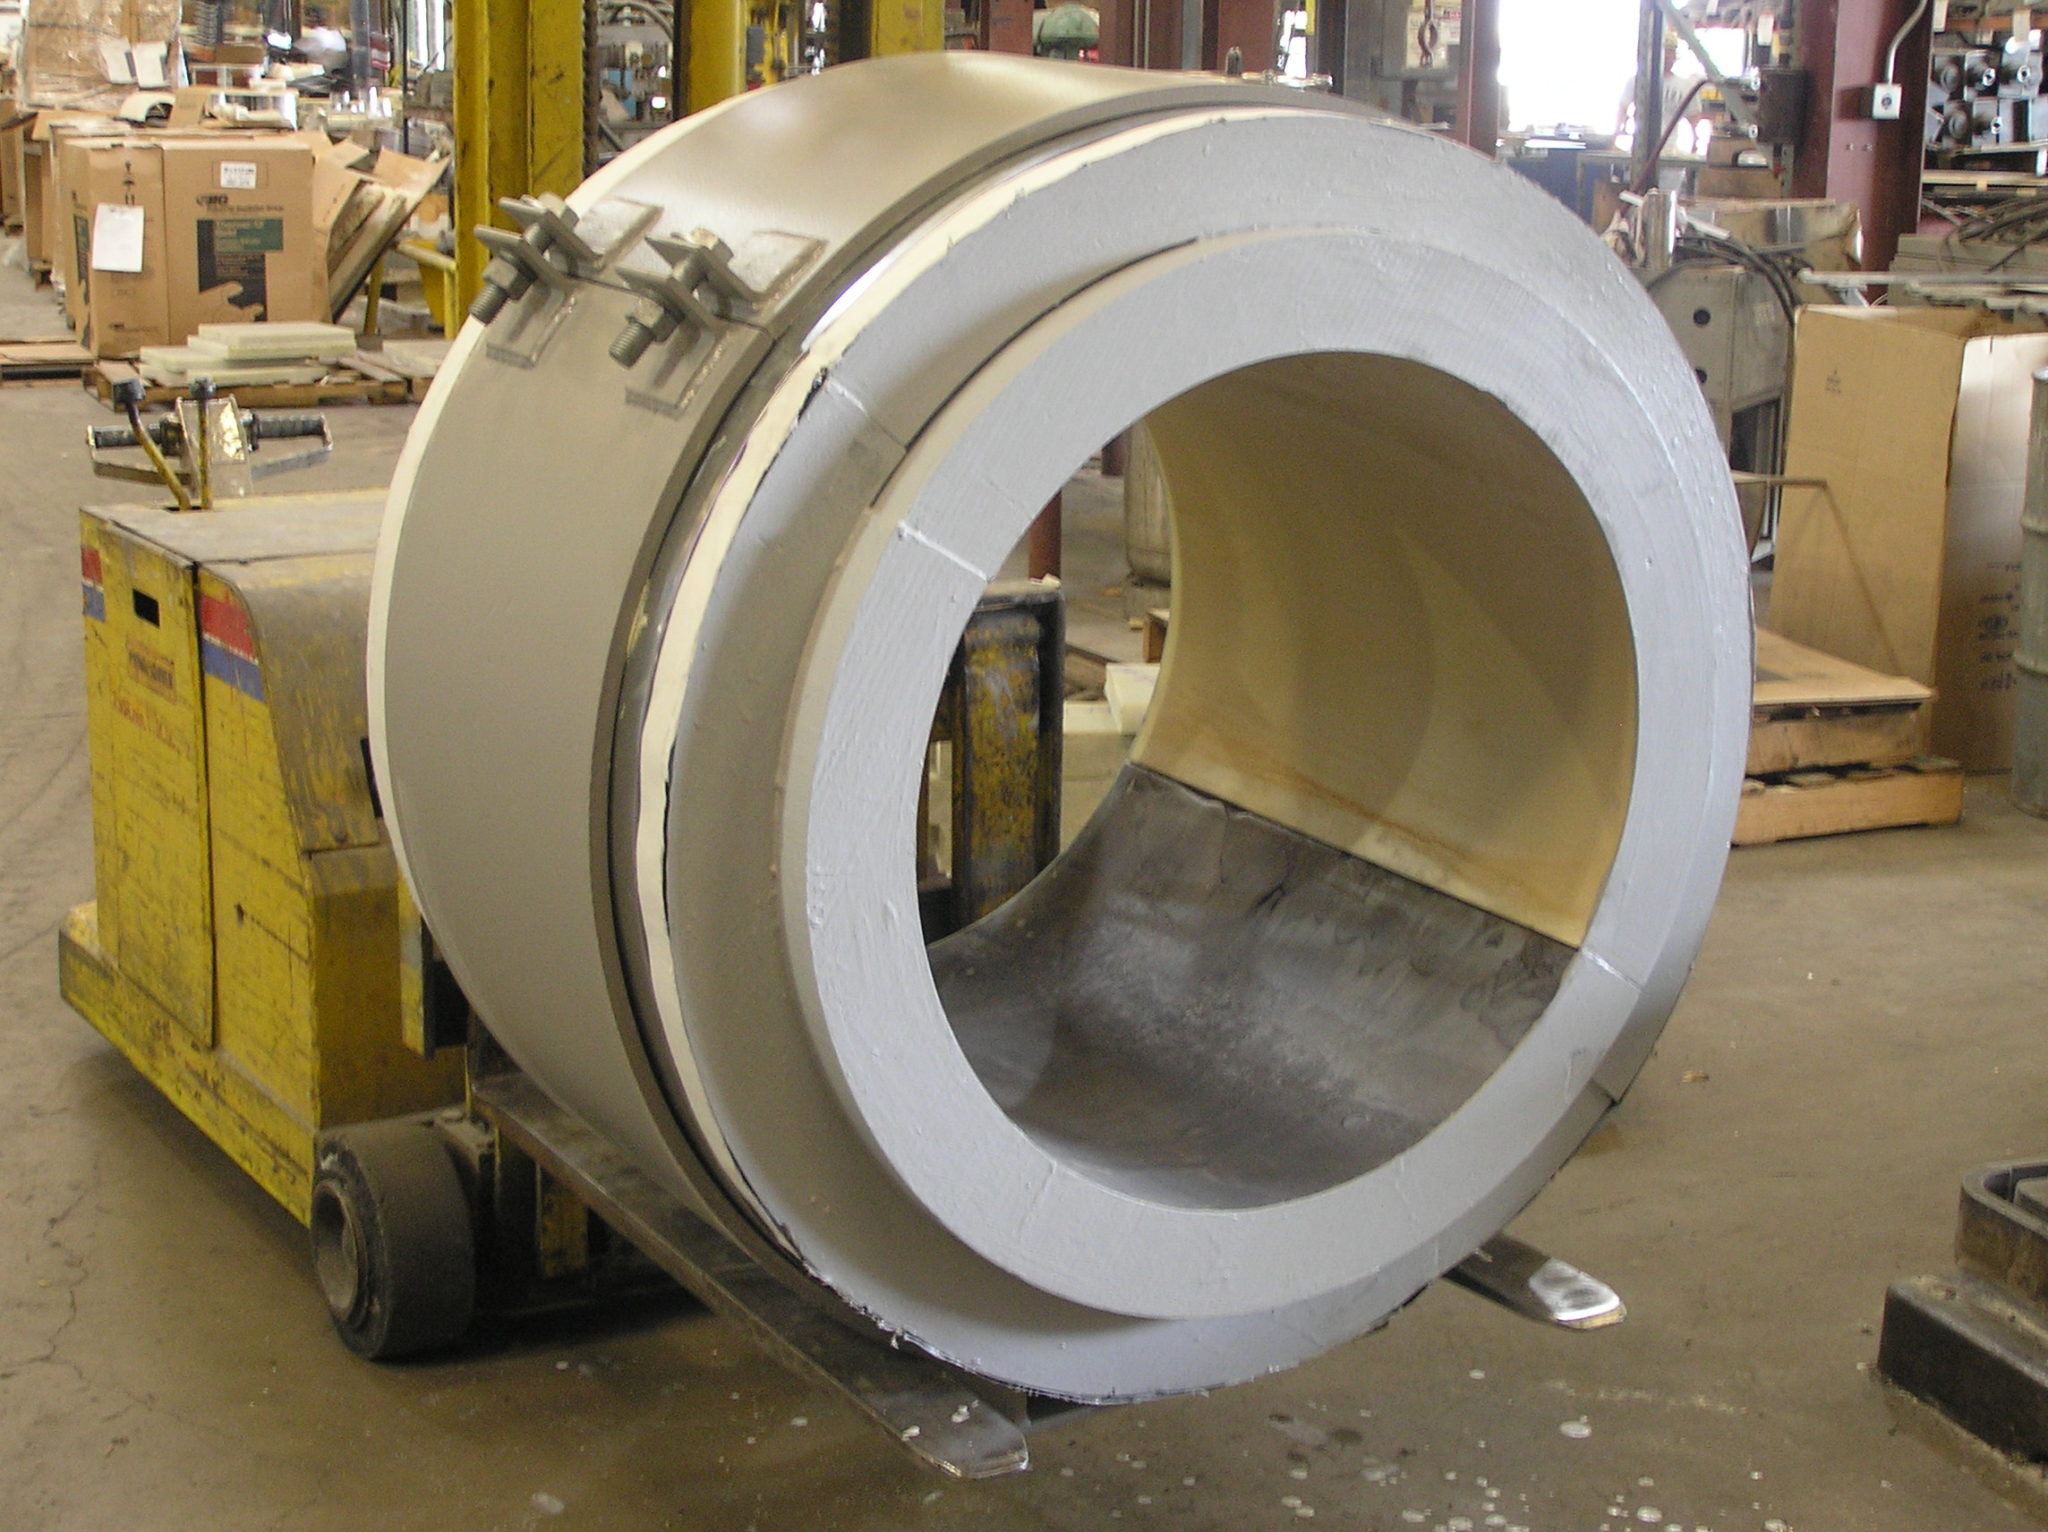 Cold Insulated Pipe Shoes For An Lng Plant